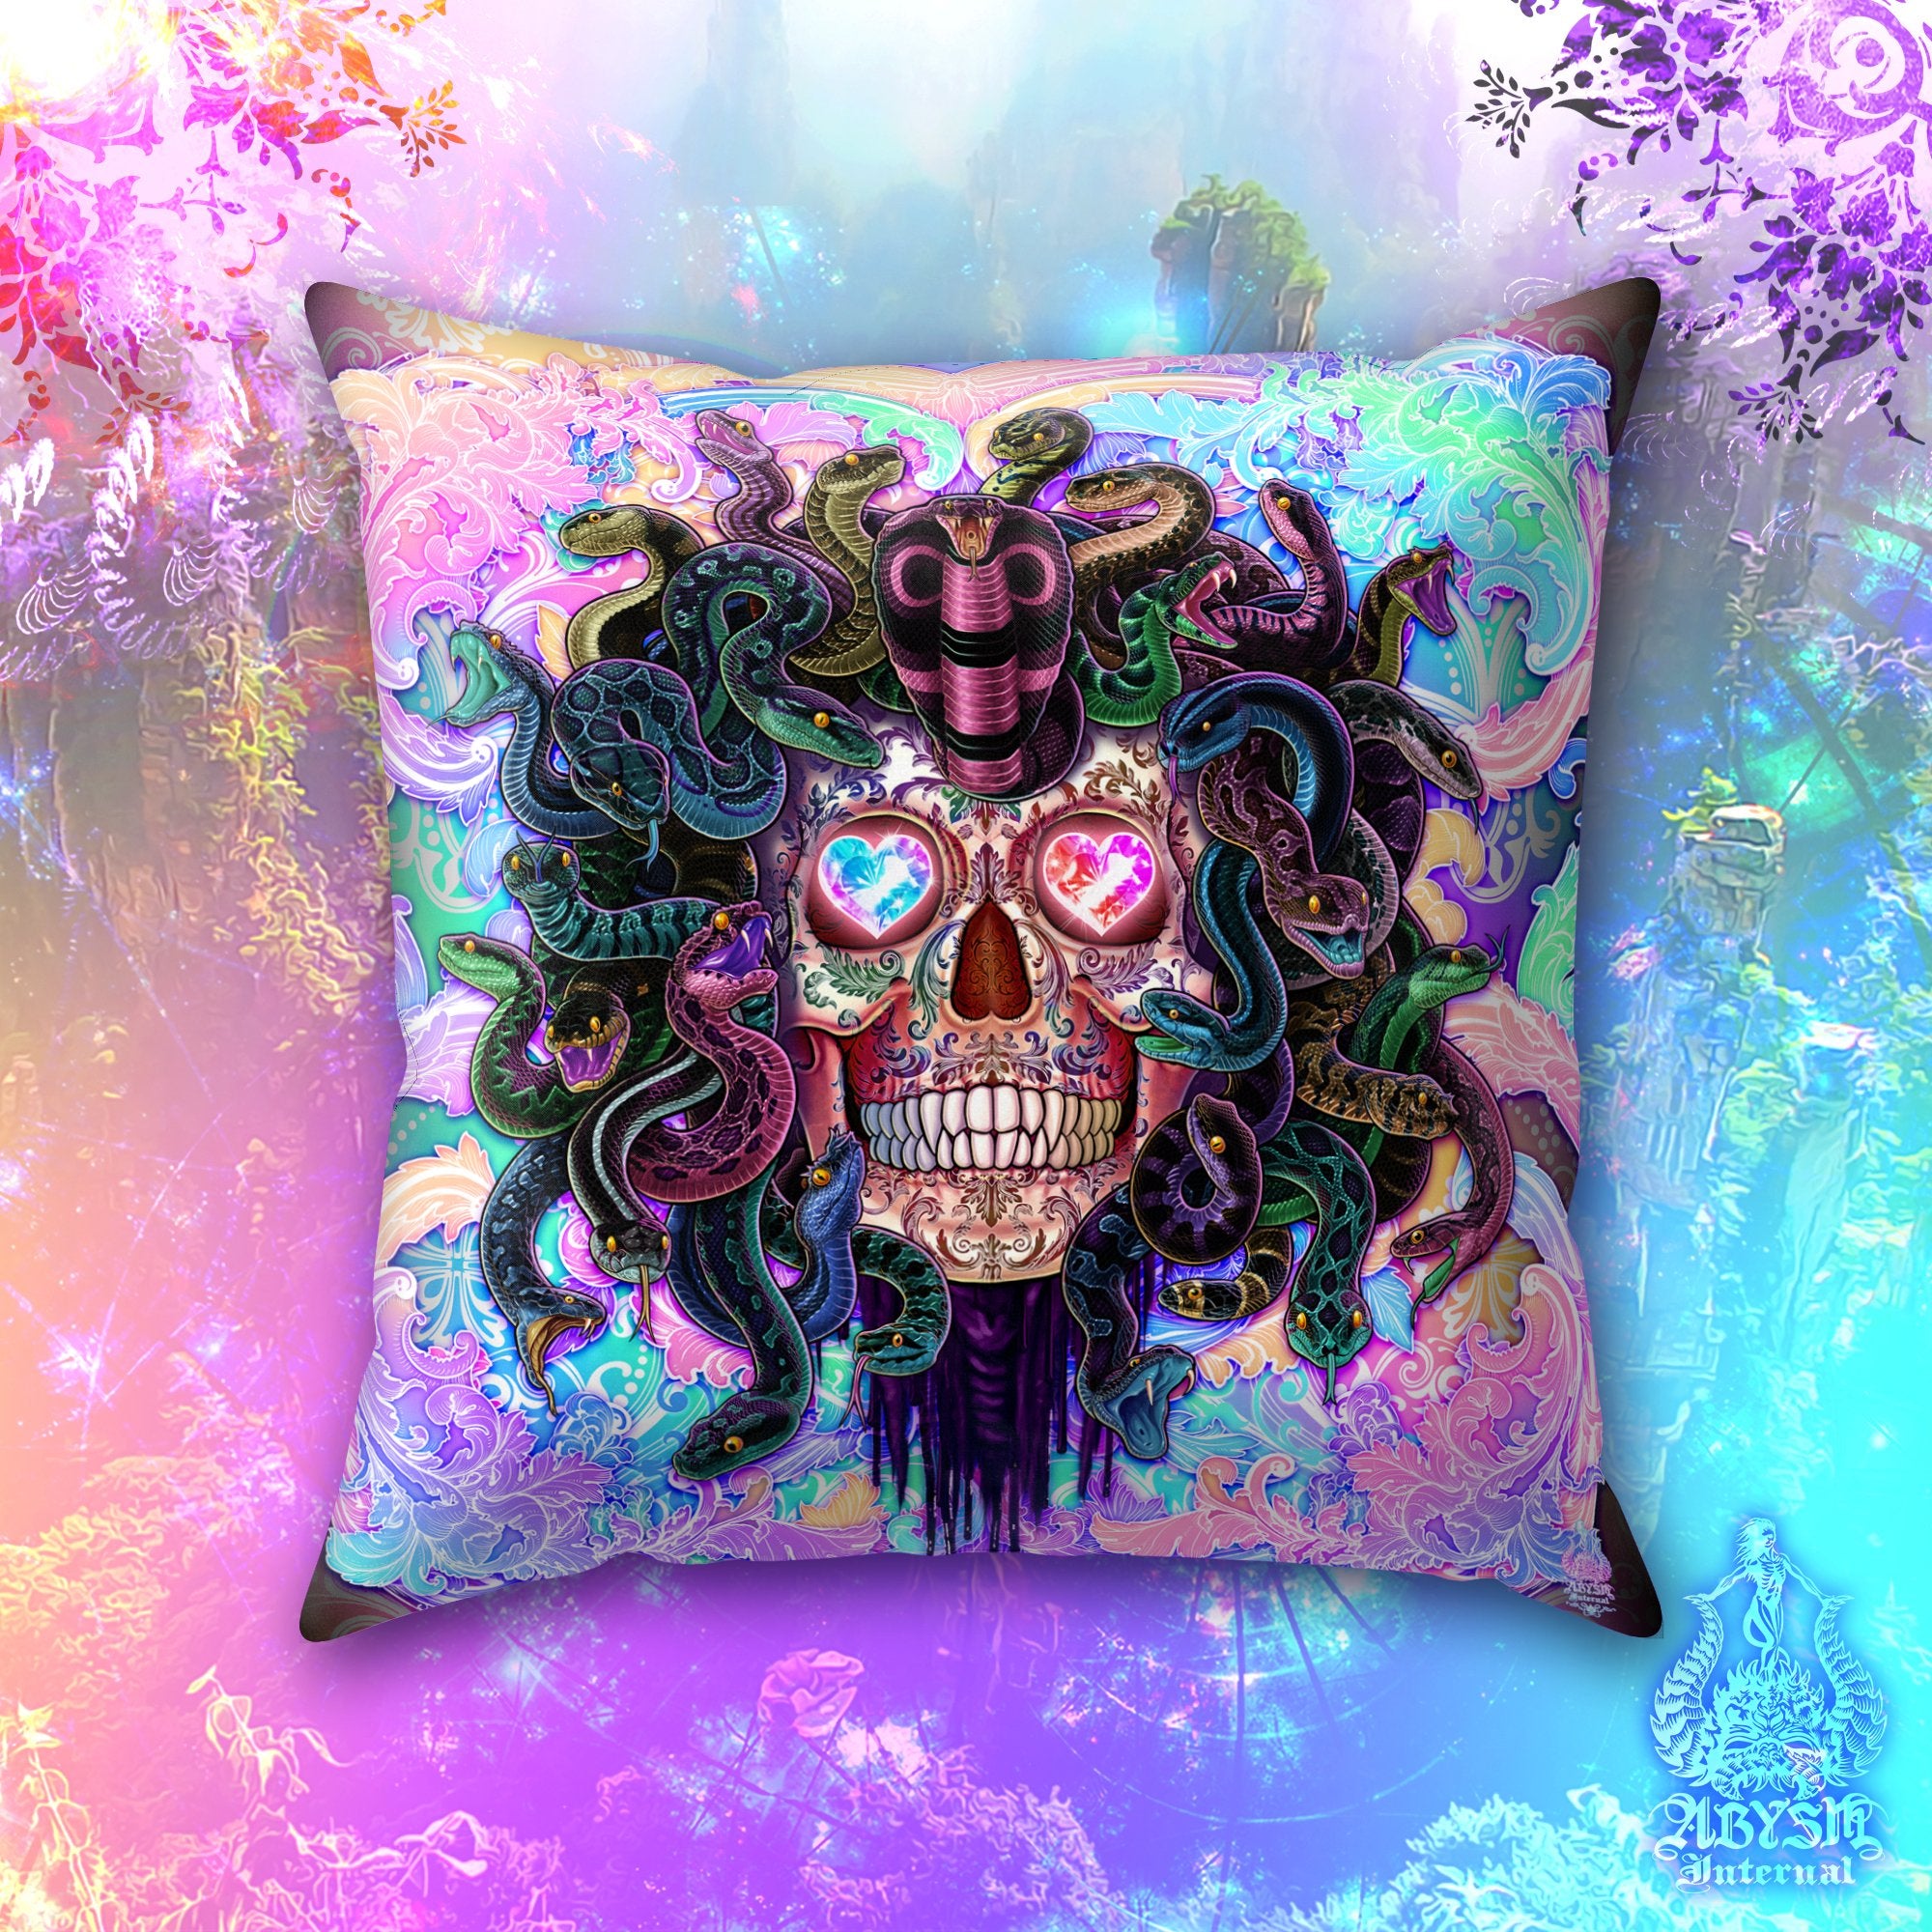 Psychedelic Medusa Throw Pillow, Decorative Accent Pillow, Square Cushion Cover, Fantasy Room Decor, Funky Home Skull Art - Pastel Punk Black, 4 Faces - Abysm Internal